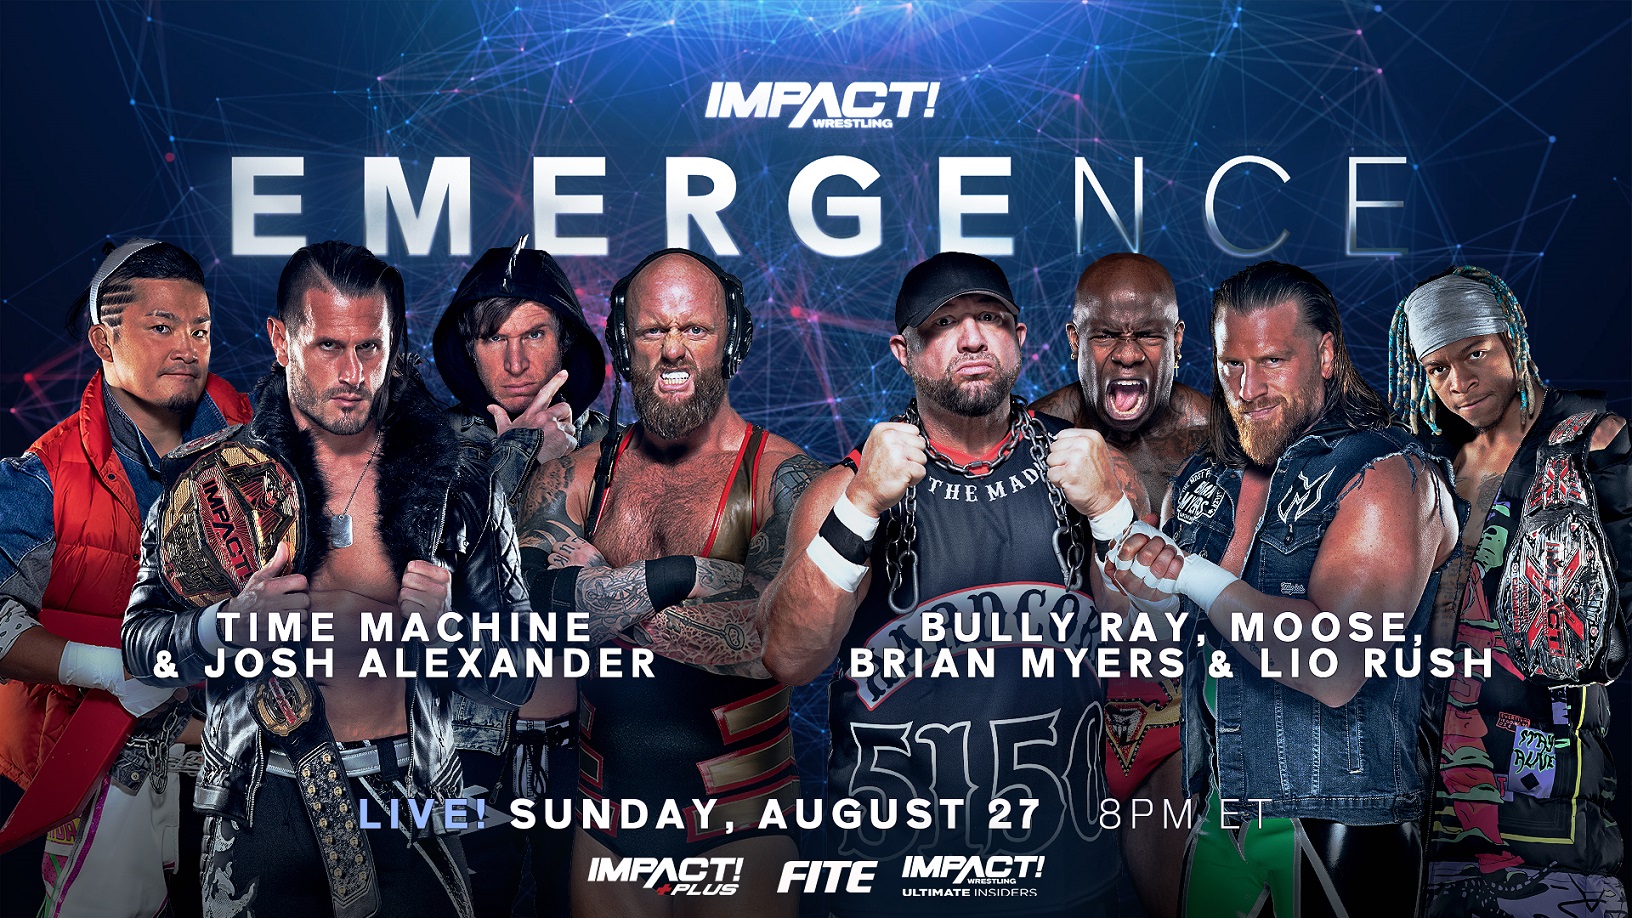 Battle Lines Drawn for Huge 8-Man Tag Team Match at Emergence